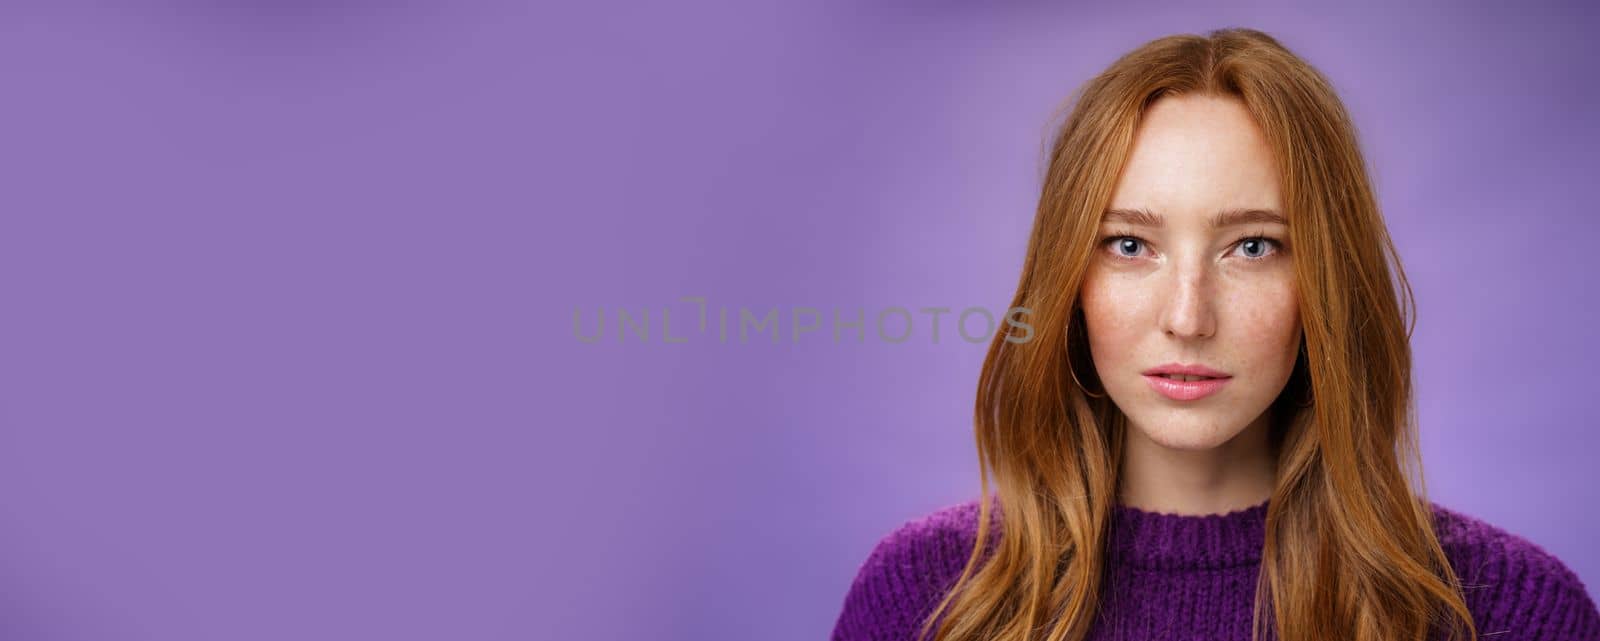 Headshot of sensual and attractive tender redhead female with freckles and pure skin looking at camera focused and sincere with slightly opened mouth, posing against purple background. People, expressions and emotions concept